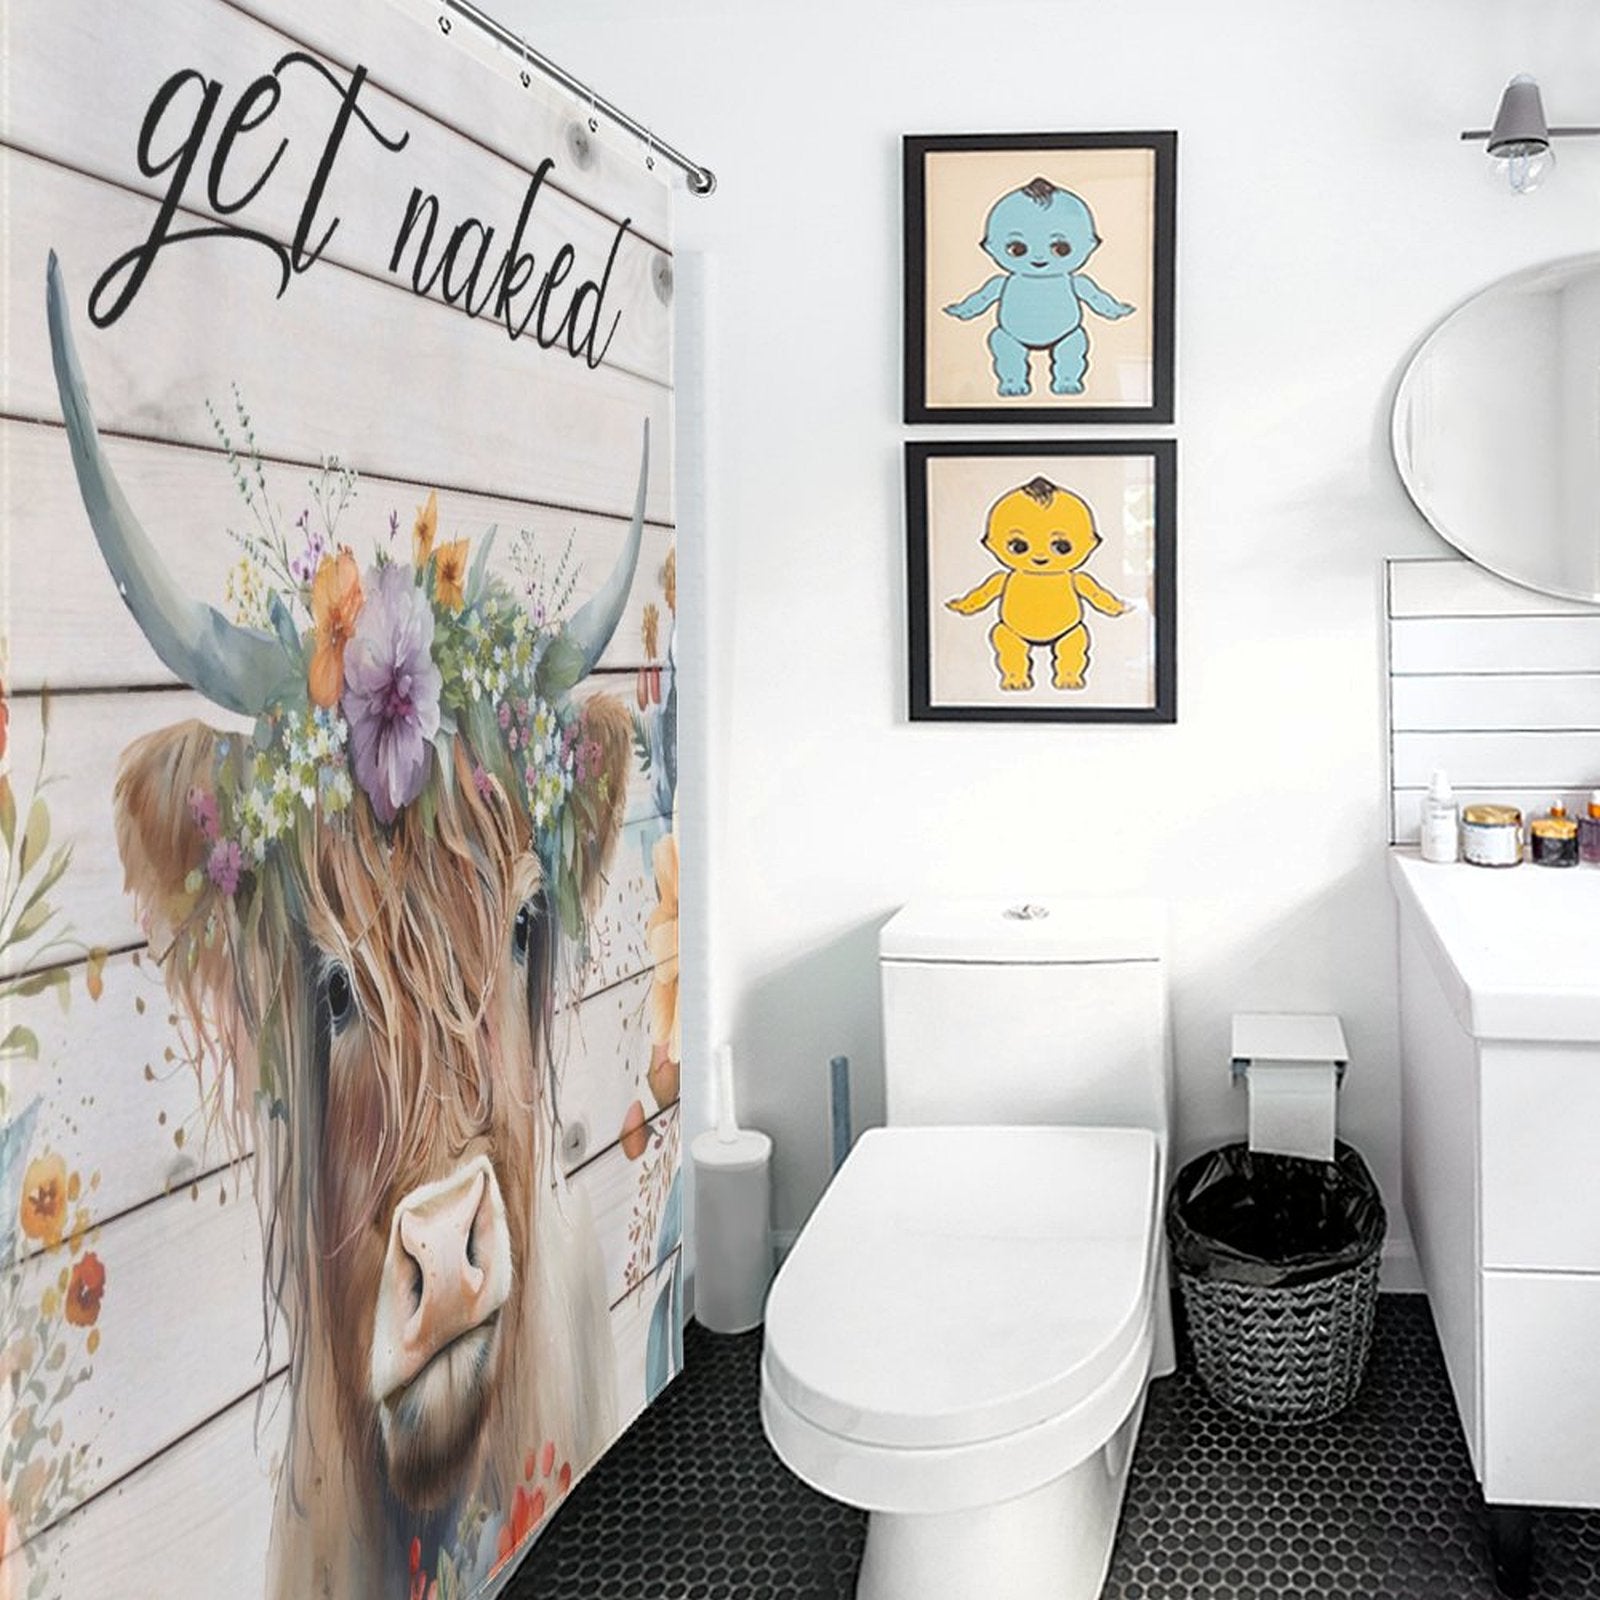 A bathroom with a toilet, sink, and decorative elements. A Cotton Cat Funny Letters Get Naked Flower Highland Cow Shower Curtain-Cottoncat displays the phrase "get naked." Above the toilet are framed illustrations of cartoon characters.